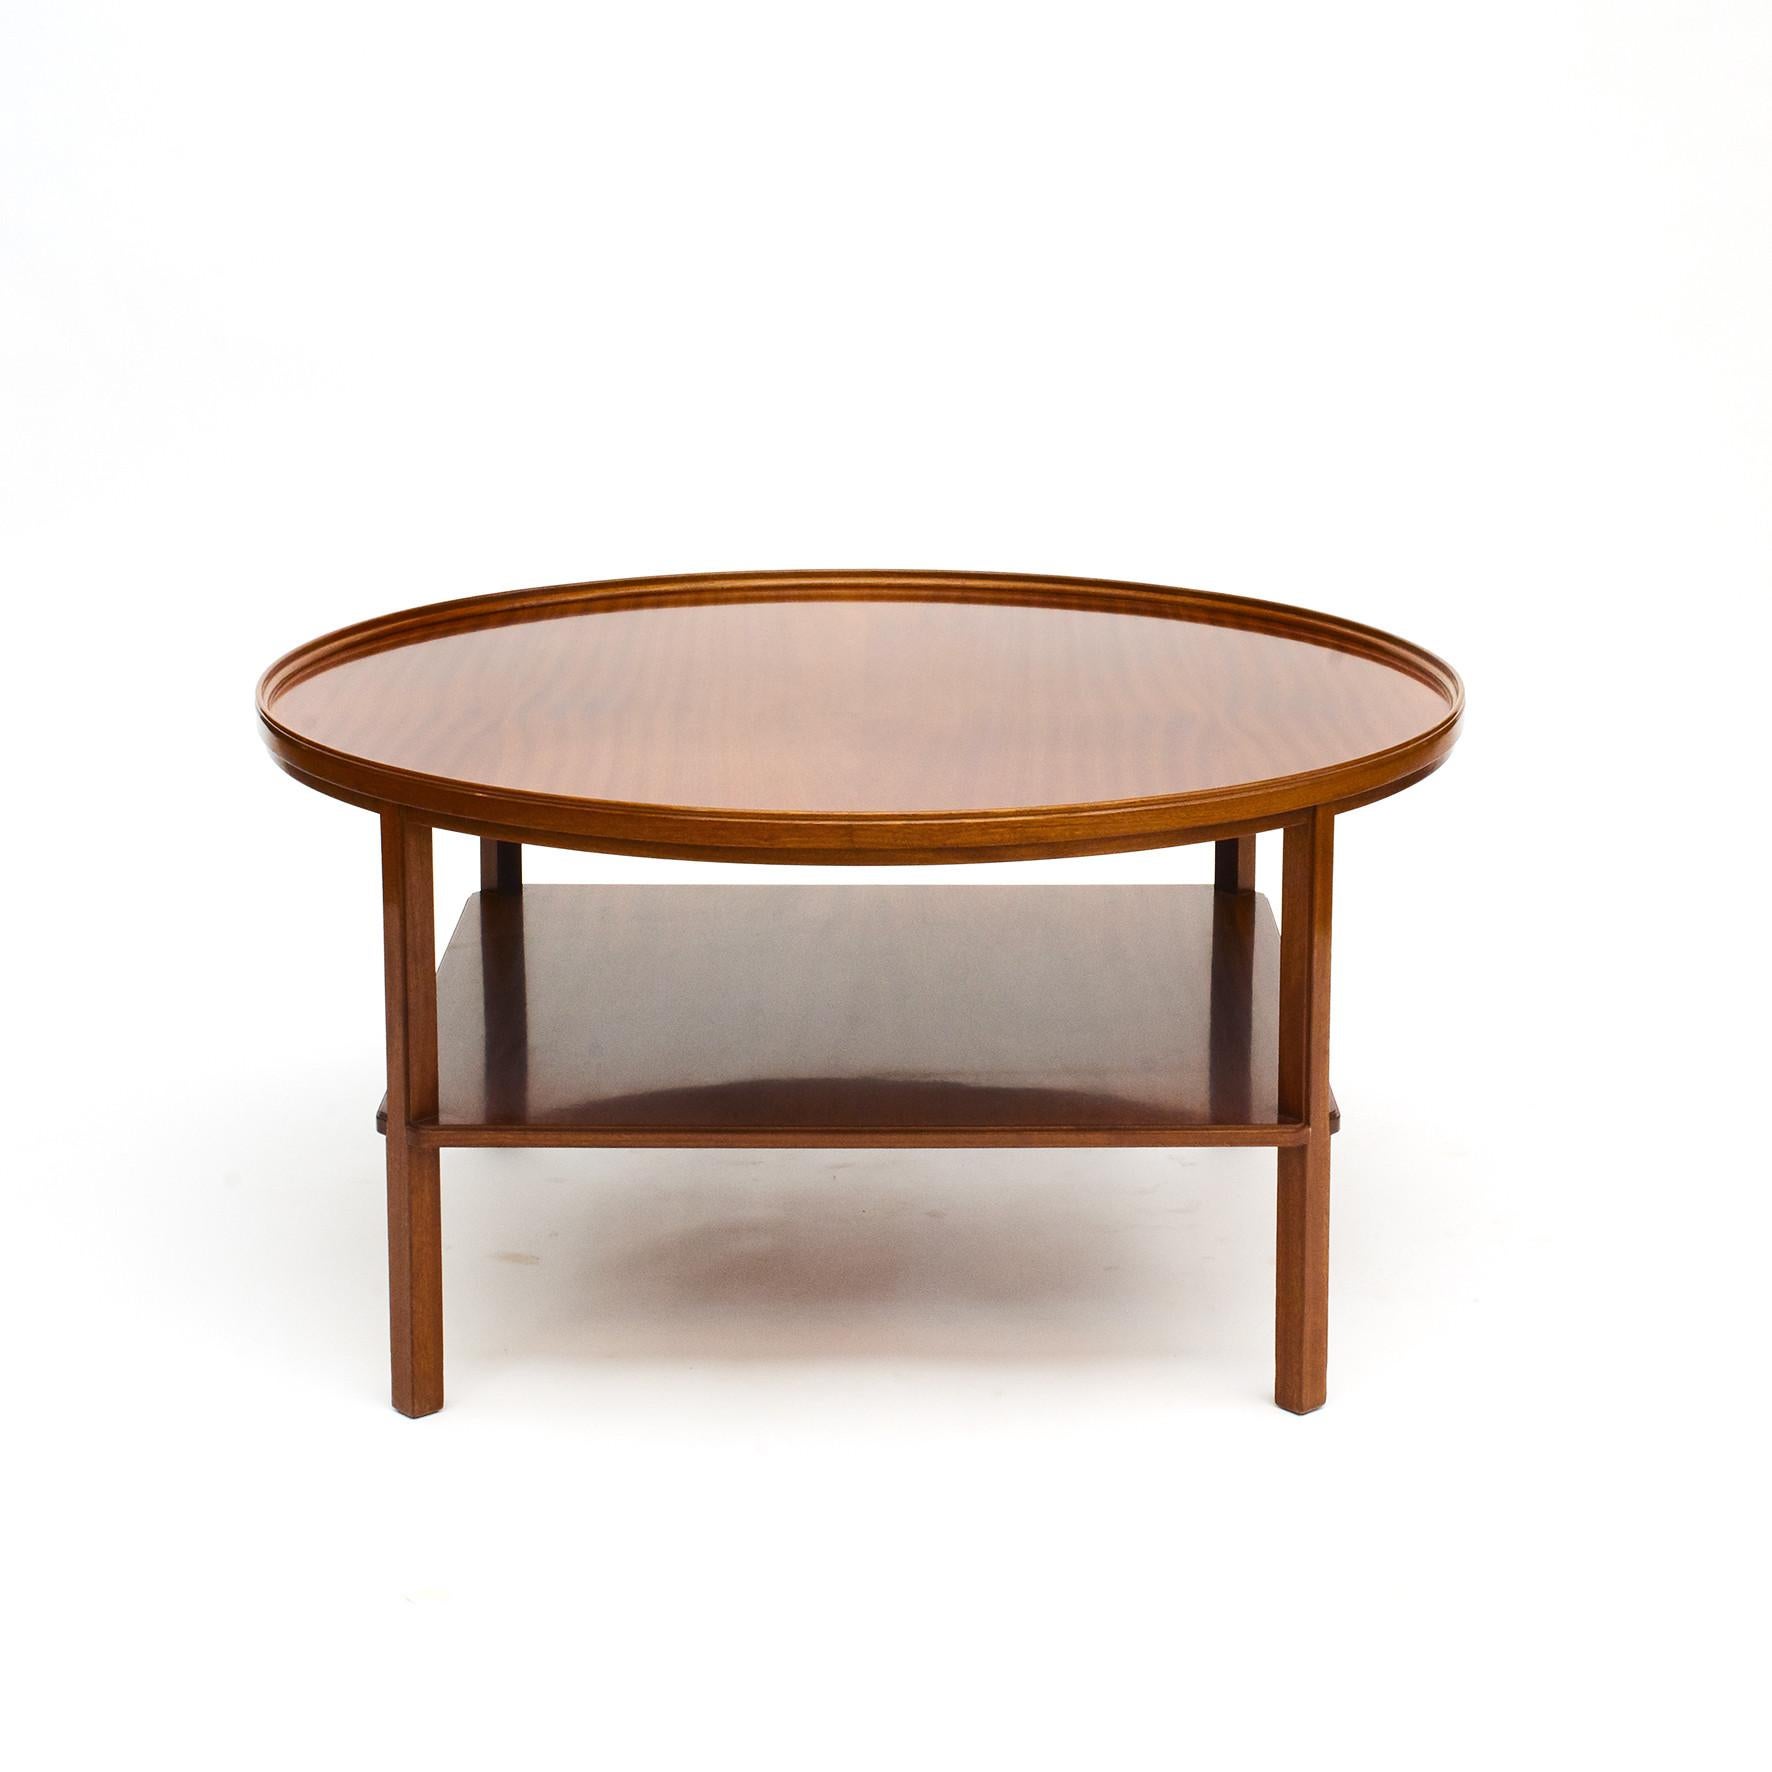 Round mahogany coffee table by Kaare Klint, model 6687.
Cuban mahogany, with lower shelf and a raised rim around the table top.
Designed in 1929 by Kaare Klint, (1888-1954). Produced by Rud. Rasmussen 1929-1950.
Underside with manufacturer's